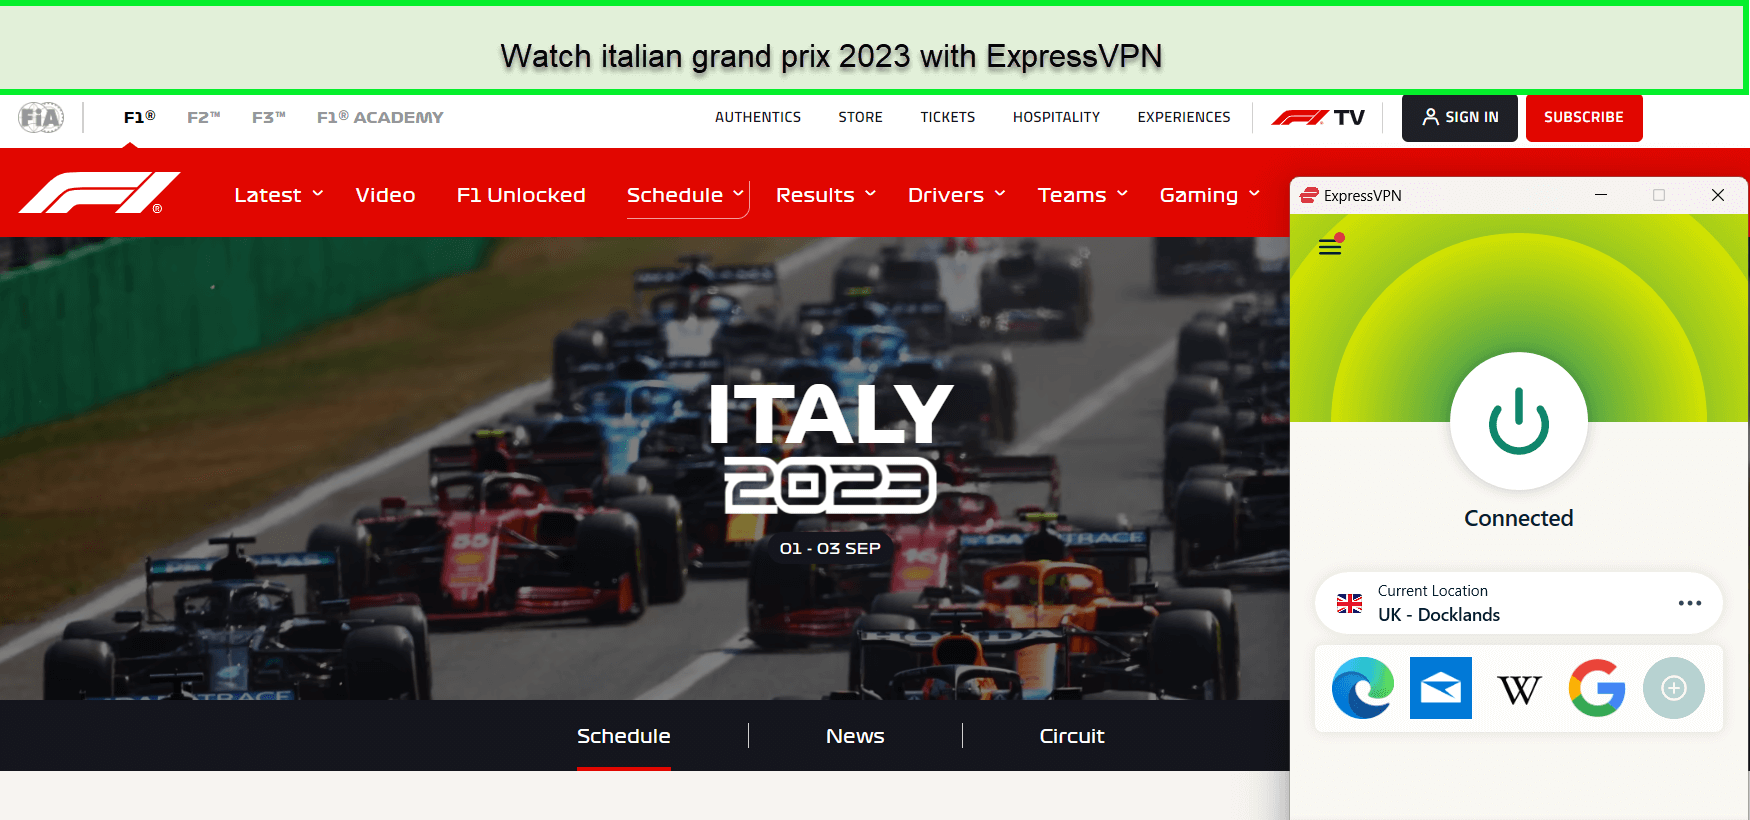 How-to-Watch-Italian-Grand-Prix-2023-in-France-on-ITV-with-ExpressVPN